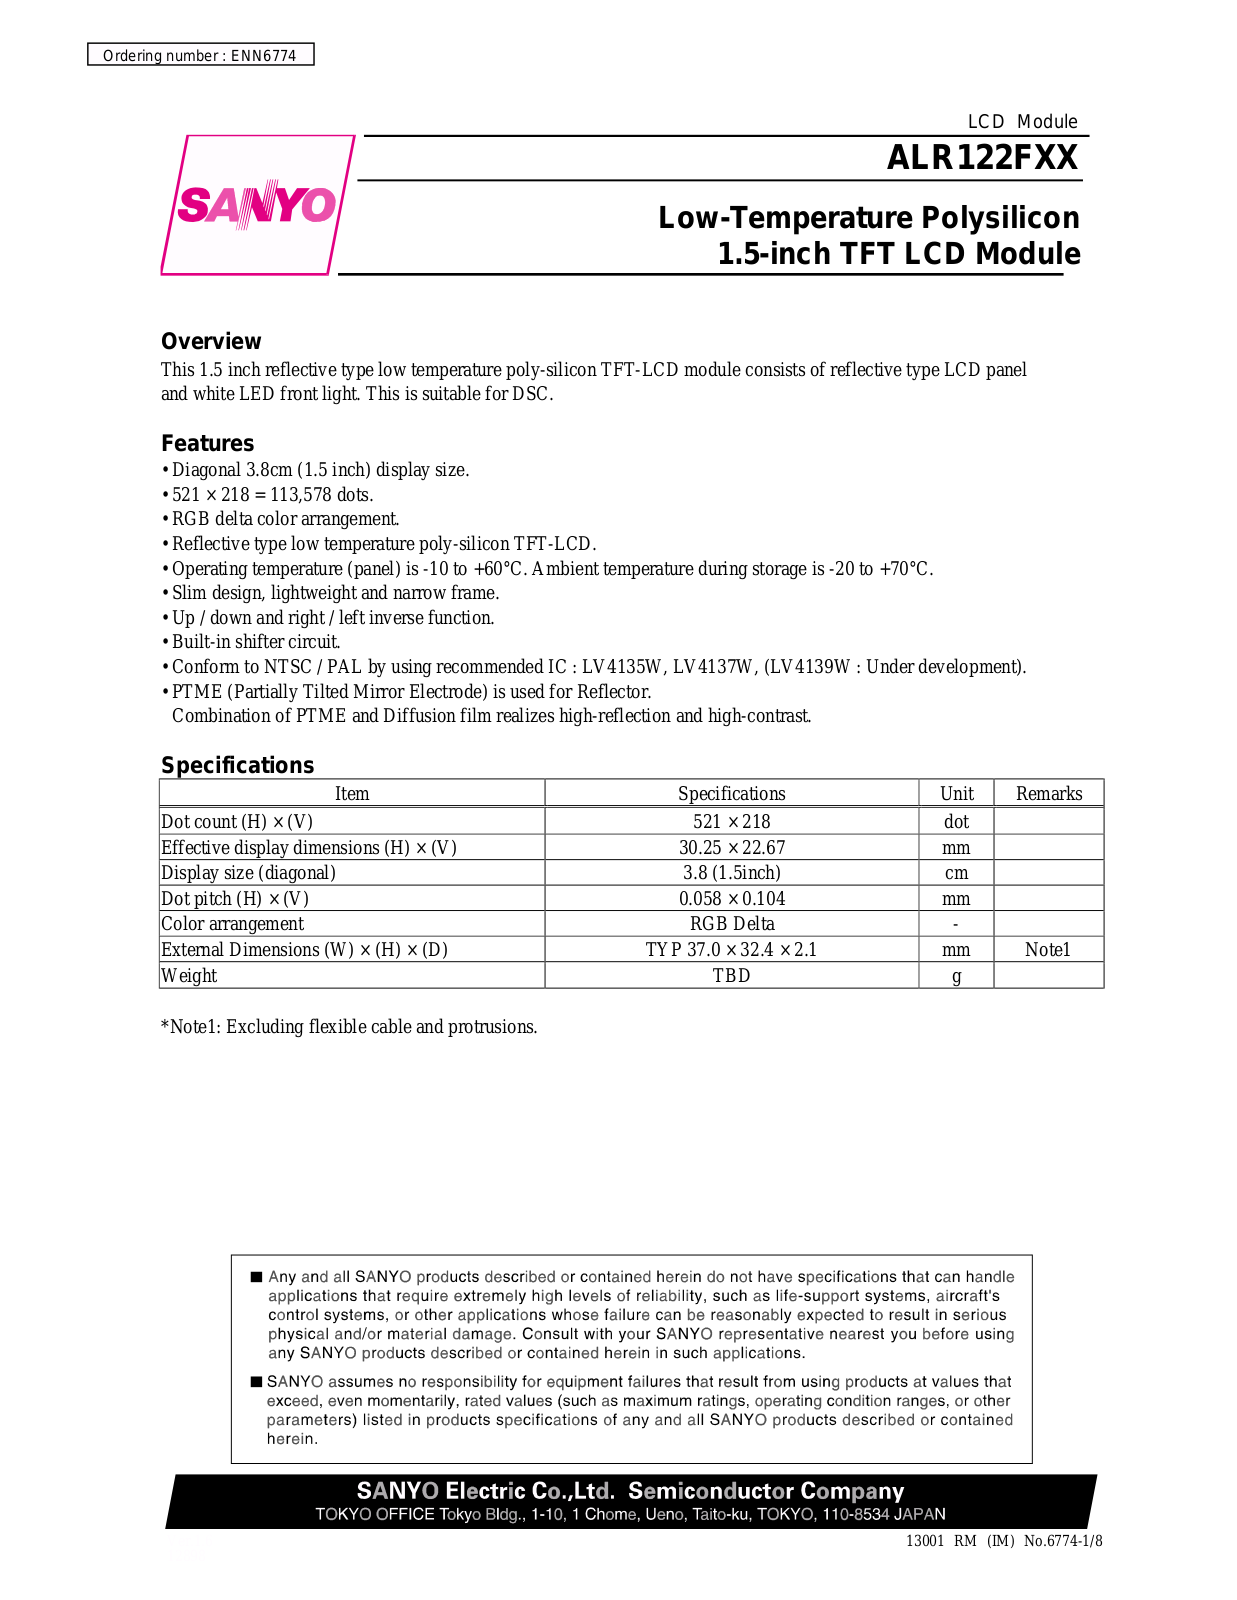 Sanyo ALR122FXX Specifications